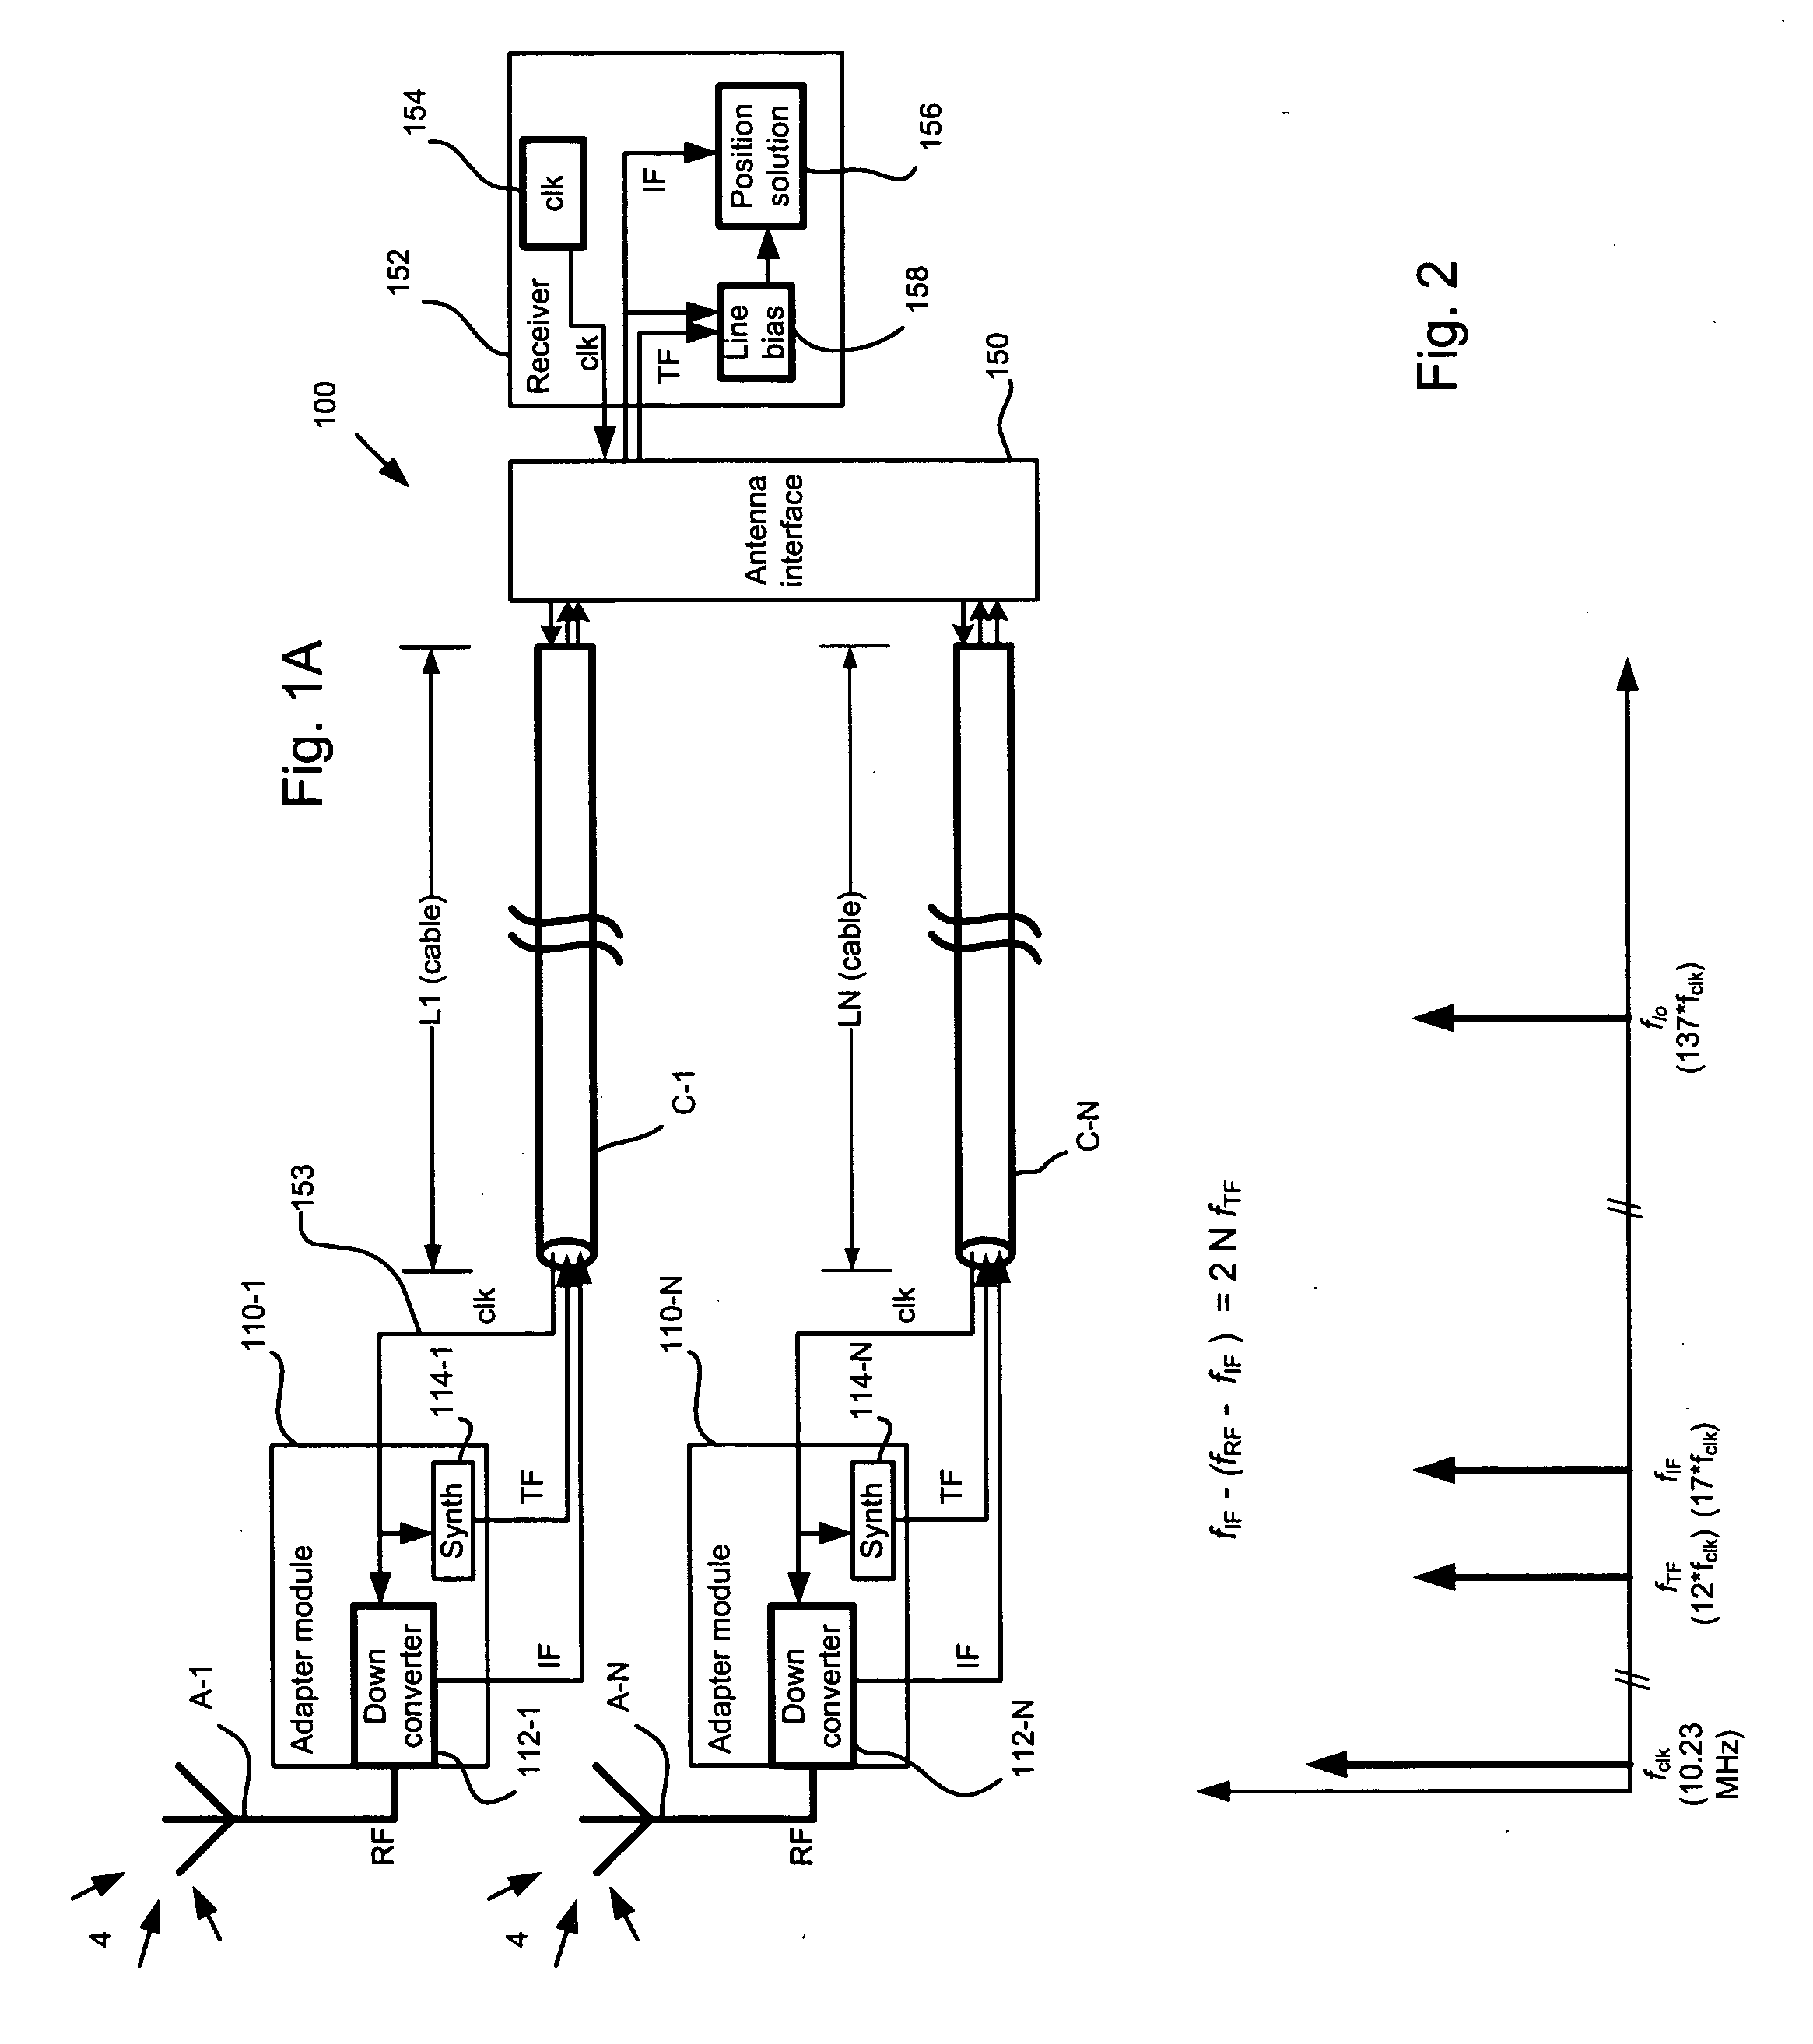 GNSS line bias measurement system and method